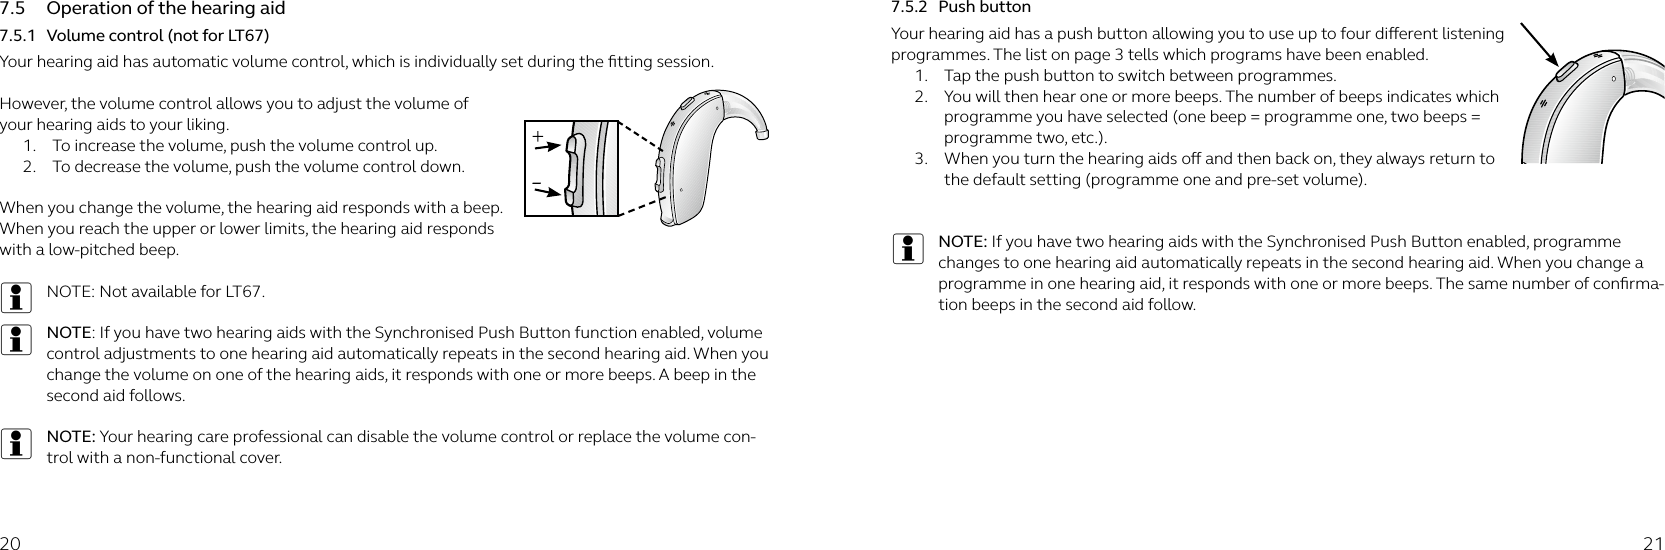 20 217.5  Operation of the hearing aid7.5.1  Volume control (not for LT67)Your hearing aid has automatic volume control, which is individually set during the ﬁtting session.  However, the volume control allows you to adjust the volume of your hearing aids to your liking.1.  To increase the volume, push the volume control up.2.  To decrease the volume, push the volume control down. When you change the volume, the hearing aid responds with a beep. When you reach the upper or lower limits, the hearing aid responds with a low-pitched beep.iNOTE: Not available for LT67.iNOTE: If you have two hearing aids with the Synchronised Push Button function enabled, volume control adjustments to one hearing aid automatically repeats in the second hearing aid. When you change the volume on one of the hearing aids, it responds with one or more beeps. A beep in the second aid follows.iNOTE: Your hearing care professional can disable the volume control or replace the volume con-trol with a non-functional cover.7.5.2  Push buttonYour hearing aid has a push button allowing you to use up to four dierent listening programmes. The list on page 3 tells which programs have been enabled.1.  Tap the push button to switch between programmes.2.  You will then hear one or more beeps. The number of beeps indicates which programme you have selected (one beep = programme one, two beeps = programme two, etc.).3.  When you turn the hearing aids o and then back on, they always return to the default setting (programme one and pre-set volume).iNOTE: If you have two hearing aids with the Synchronised Push Button enabled, programme changes to one hearing aid automatically repeats in the second hearing aid. When you change a programme in one hearing aid, it responds with one or more beeps. The same number of conﬁrma-tion beeps in the second aid follow.